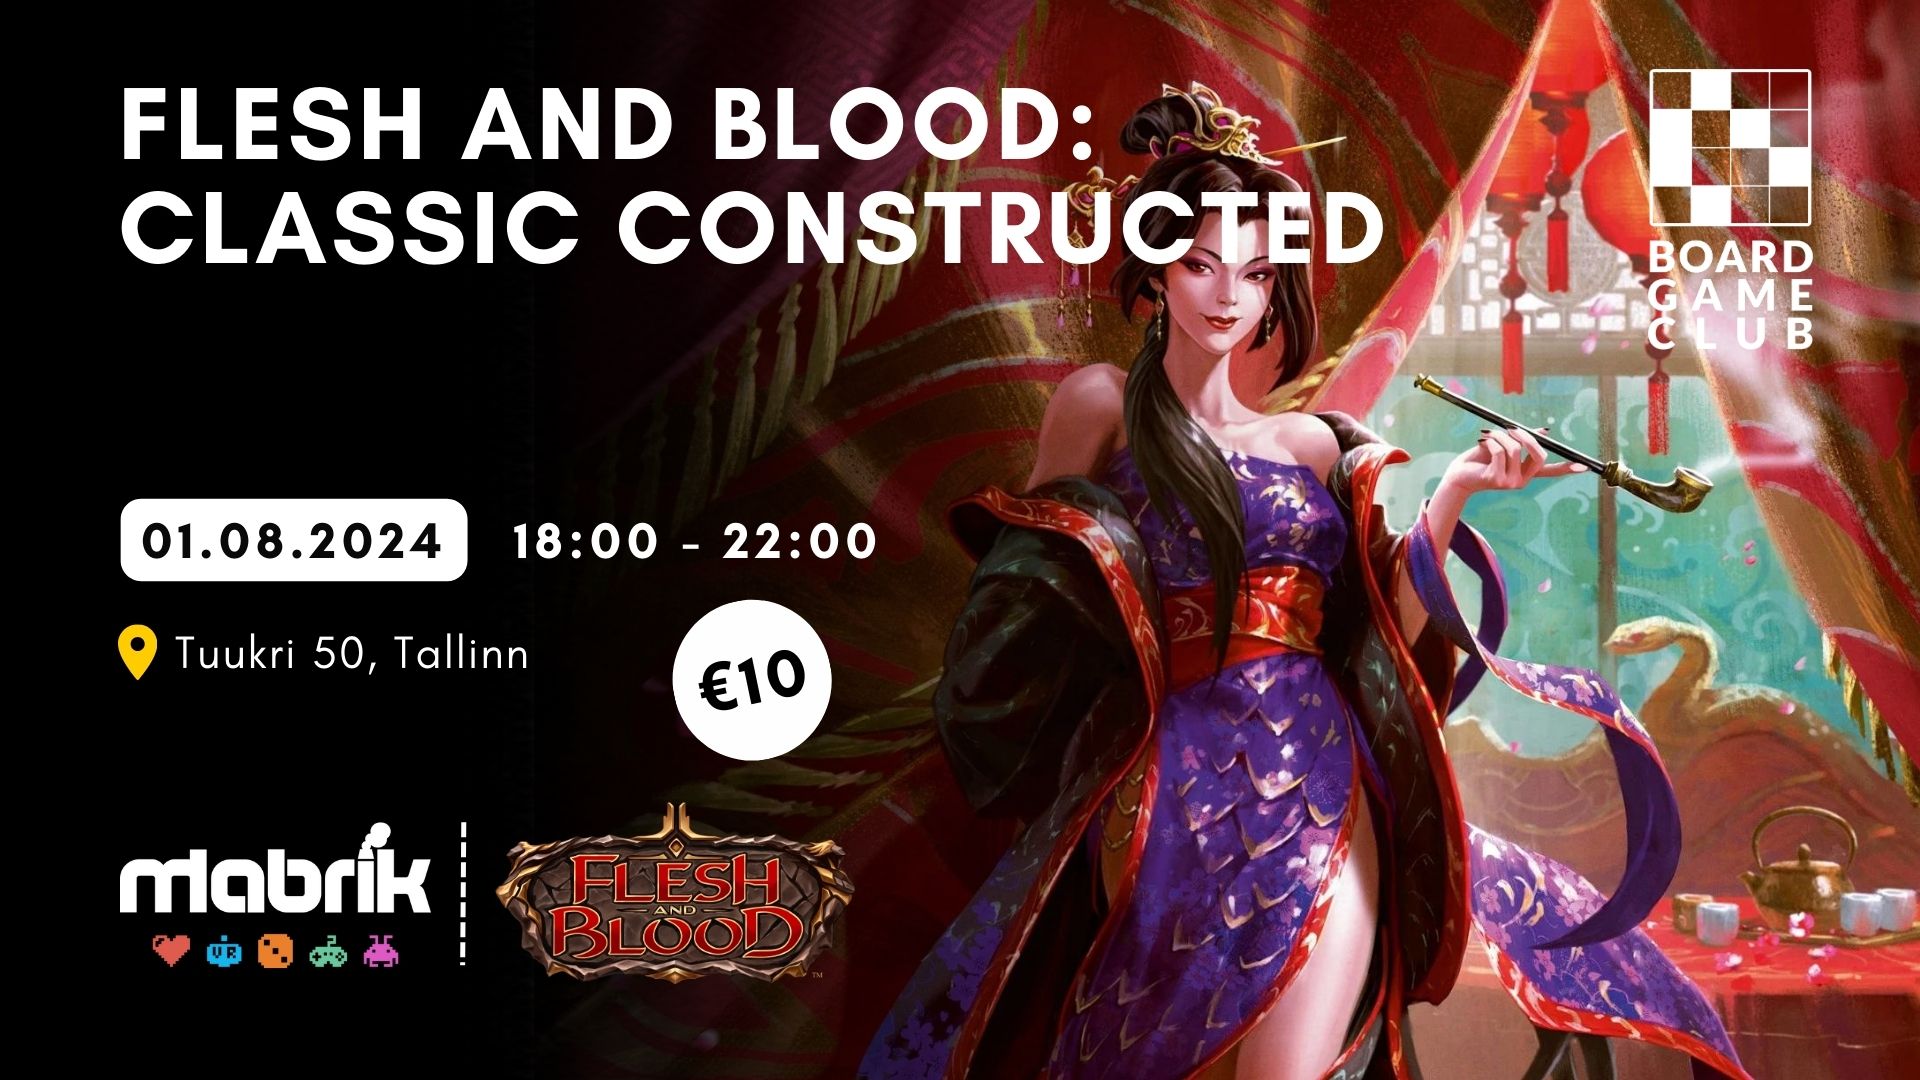 Events - 01.08.2024 - Flesh & Blood - Classic Constructed